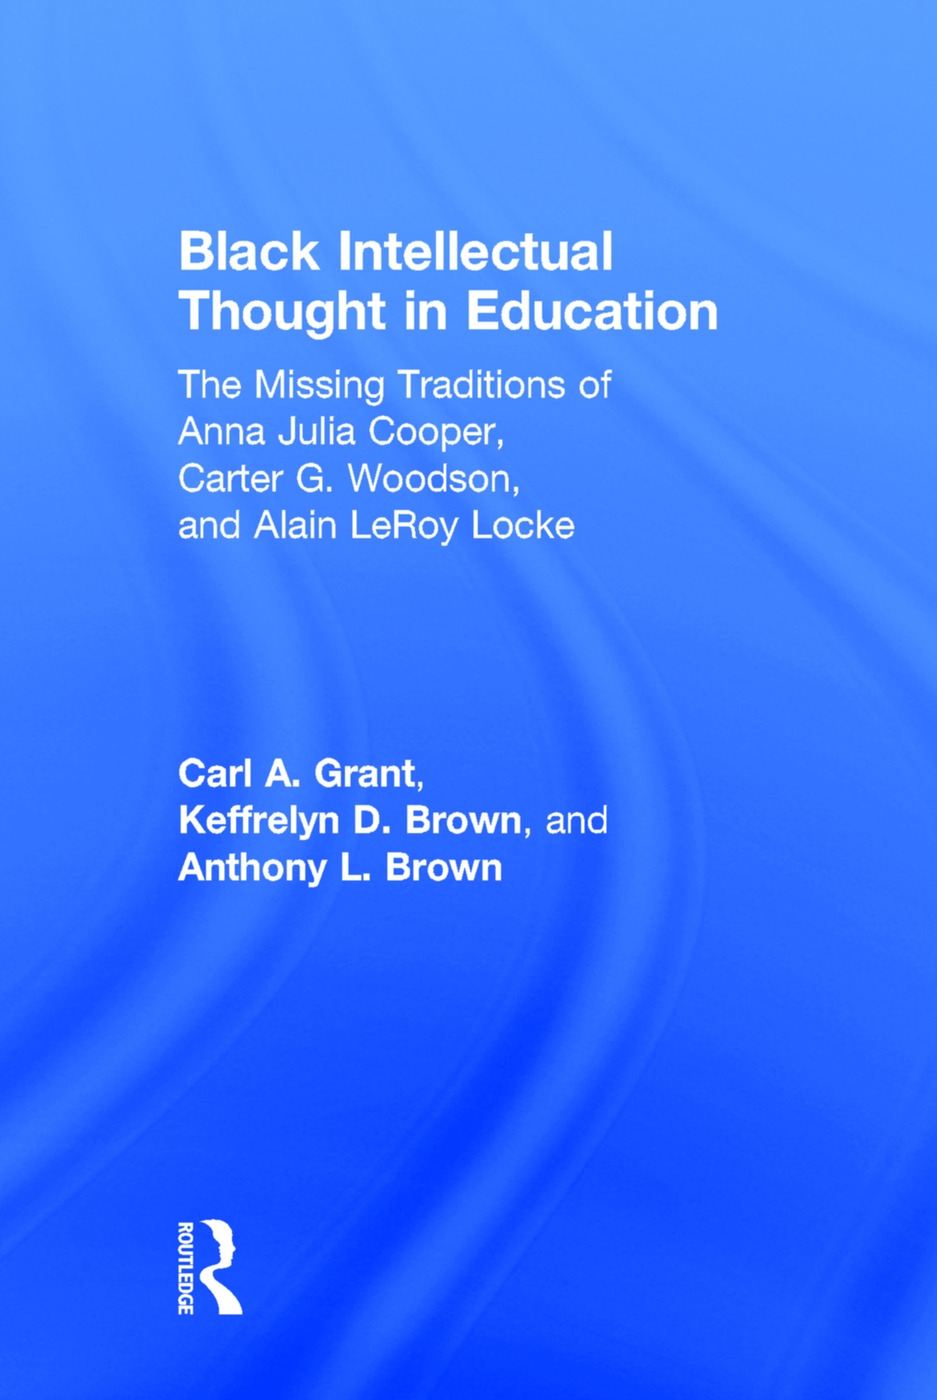 Black Intellectual Thought in Education: The Missing Traditions of Anna Julia Cooper, Carter G. Woodson, and Alain Leroy Locke